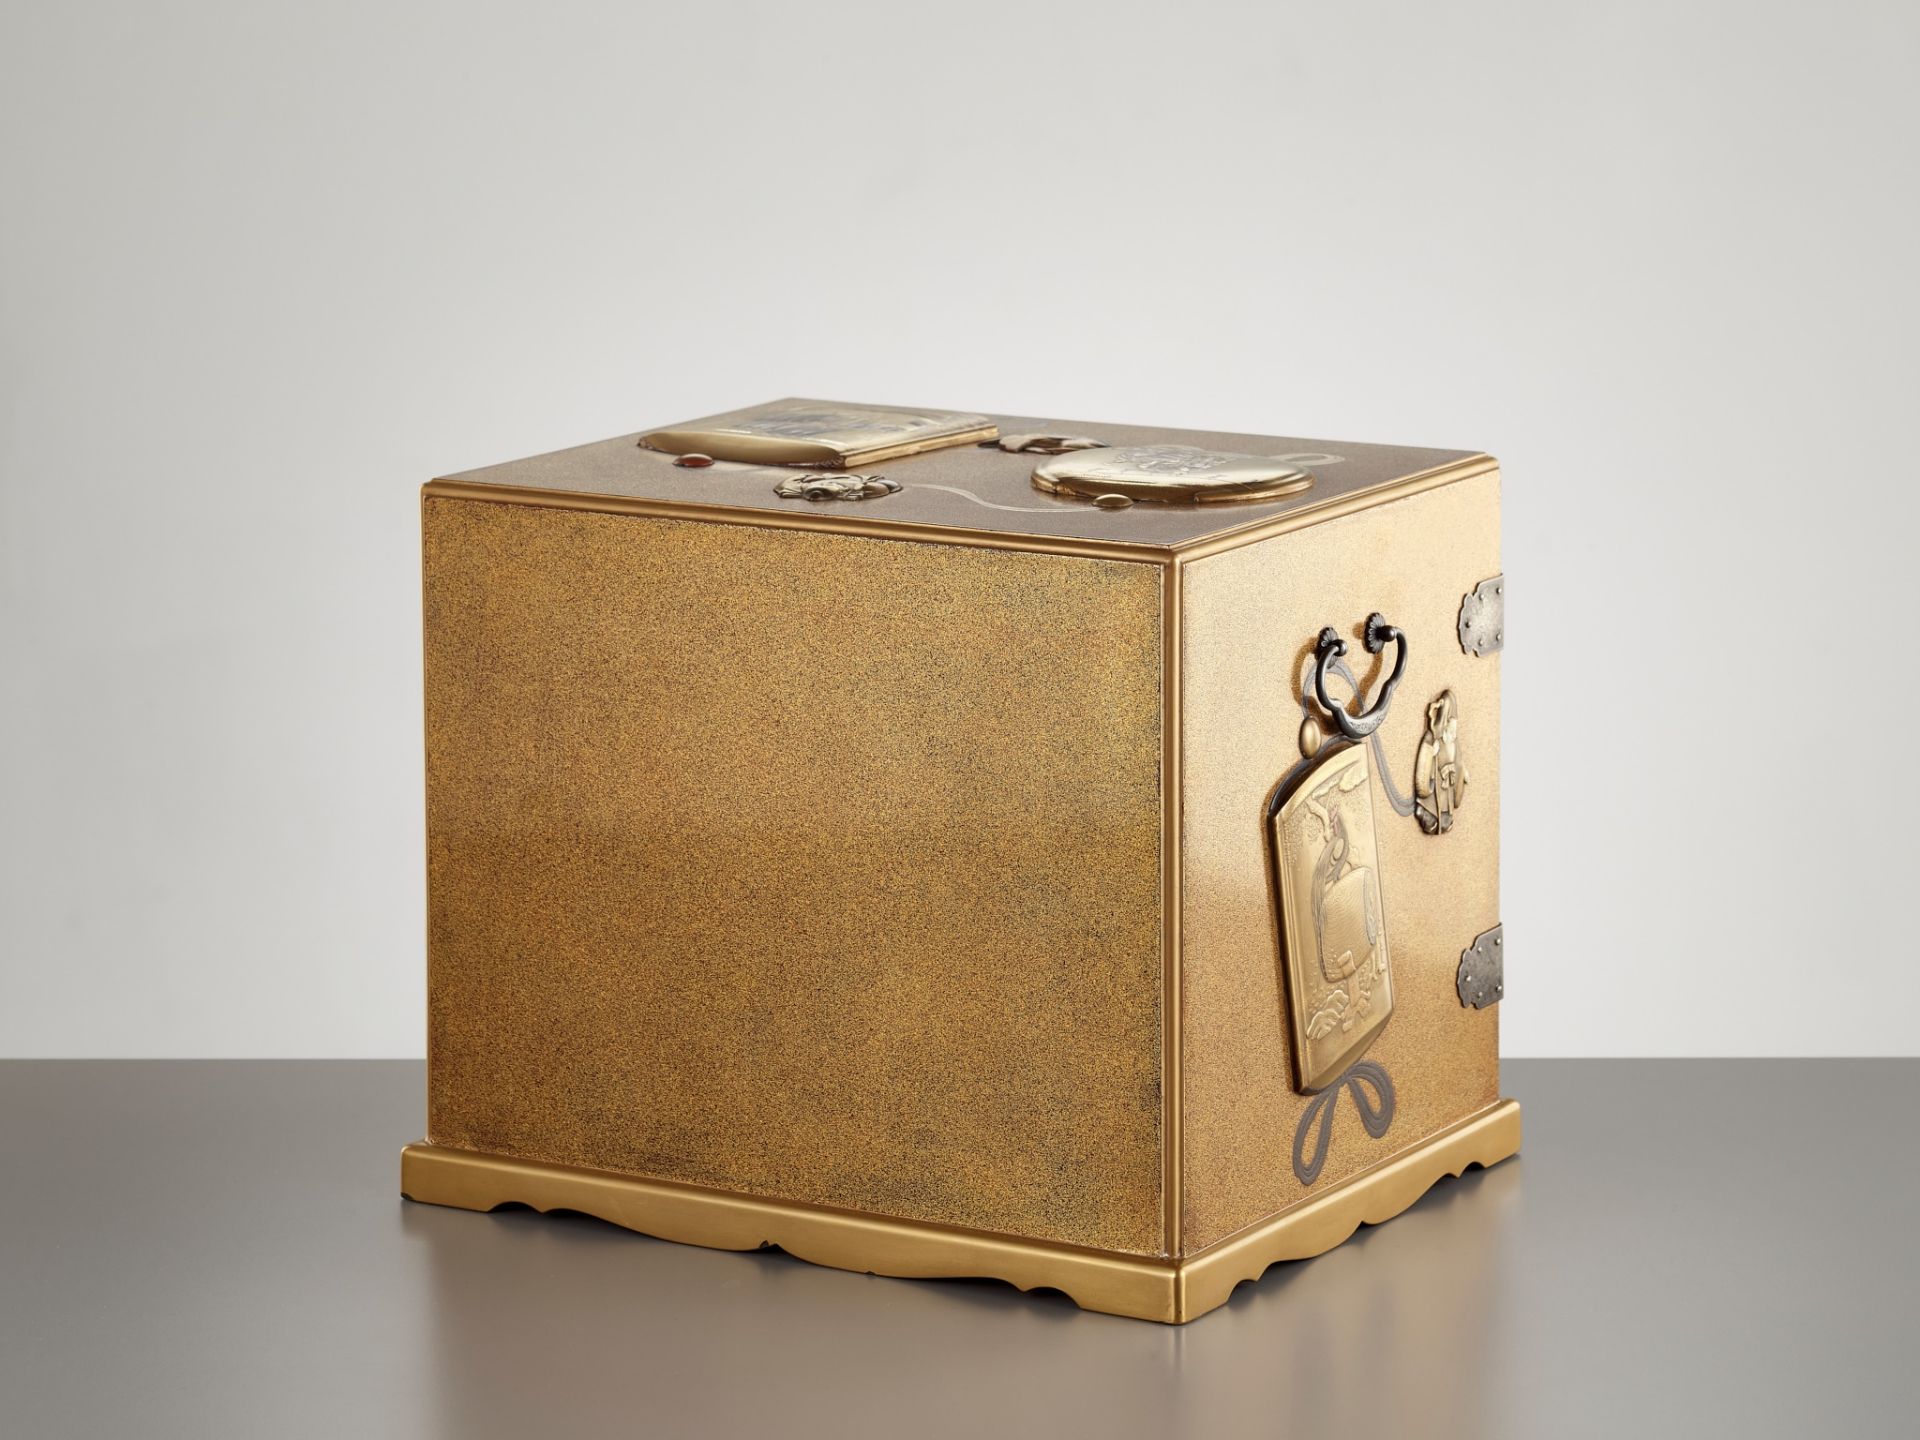 A SUPERB GOLD LACQUER INRO-DANSU (STORAGE CABINET FOR INROS) - Image 16 of 17